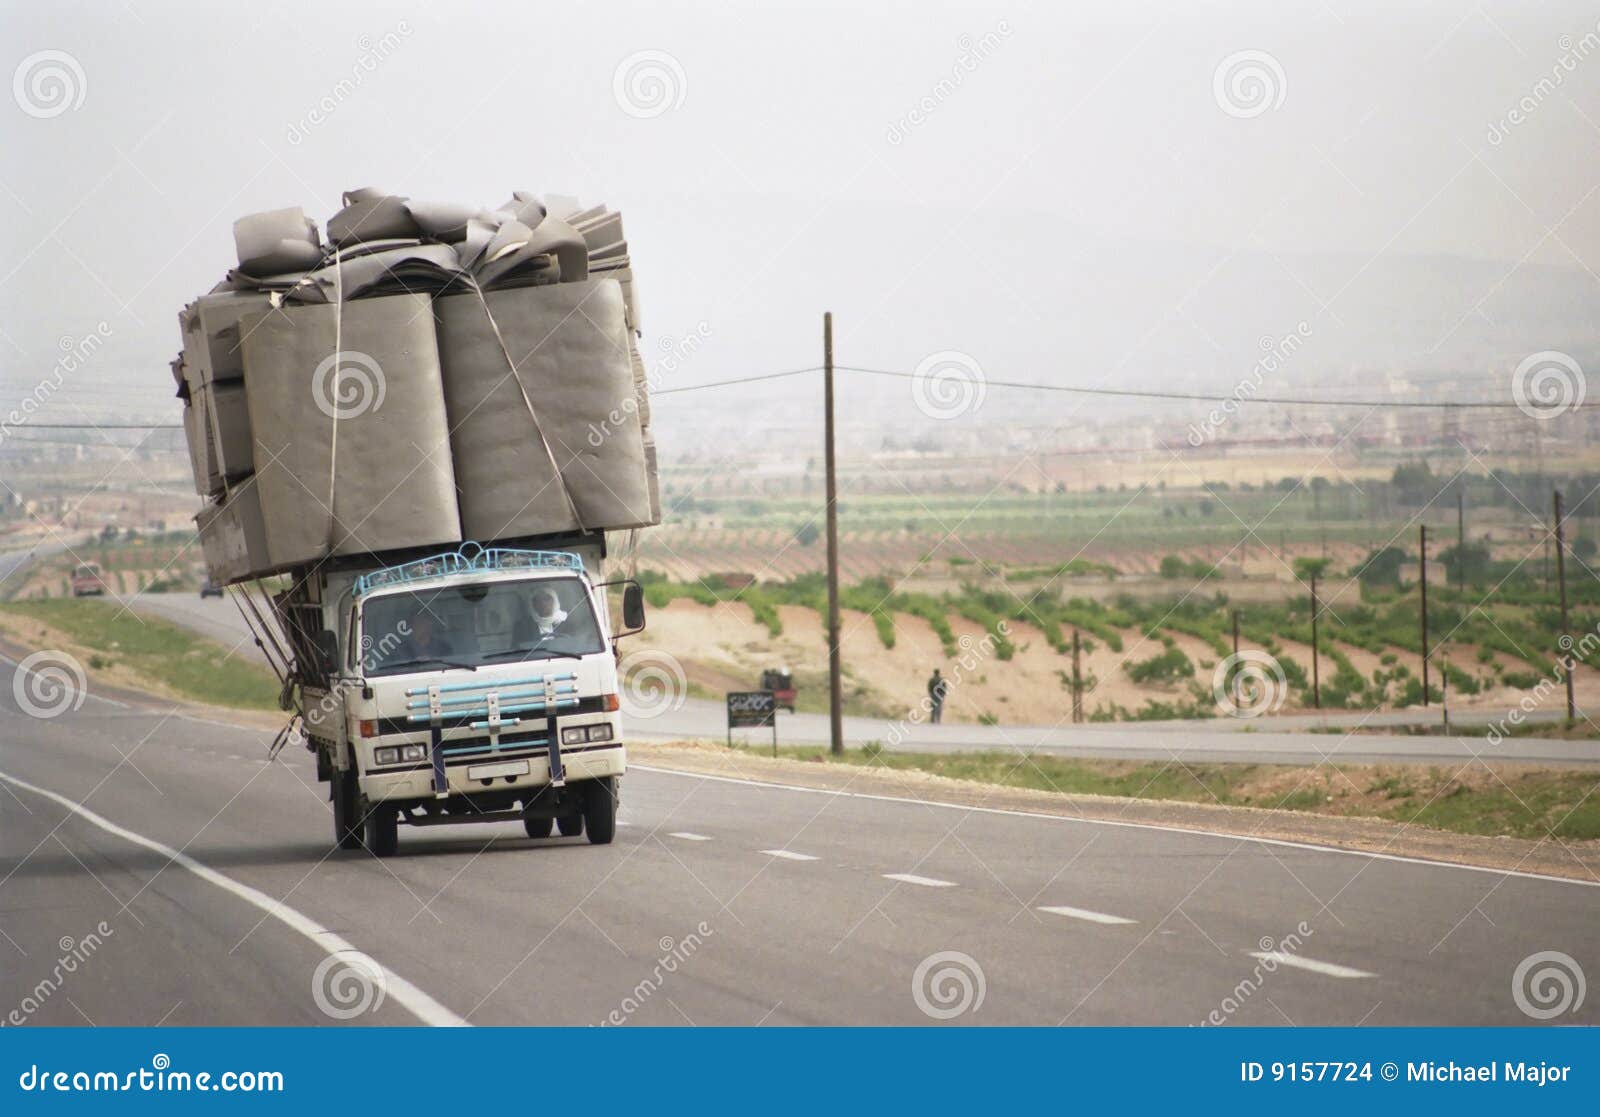 overloaded lorry in syria